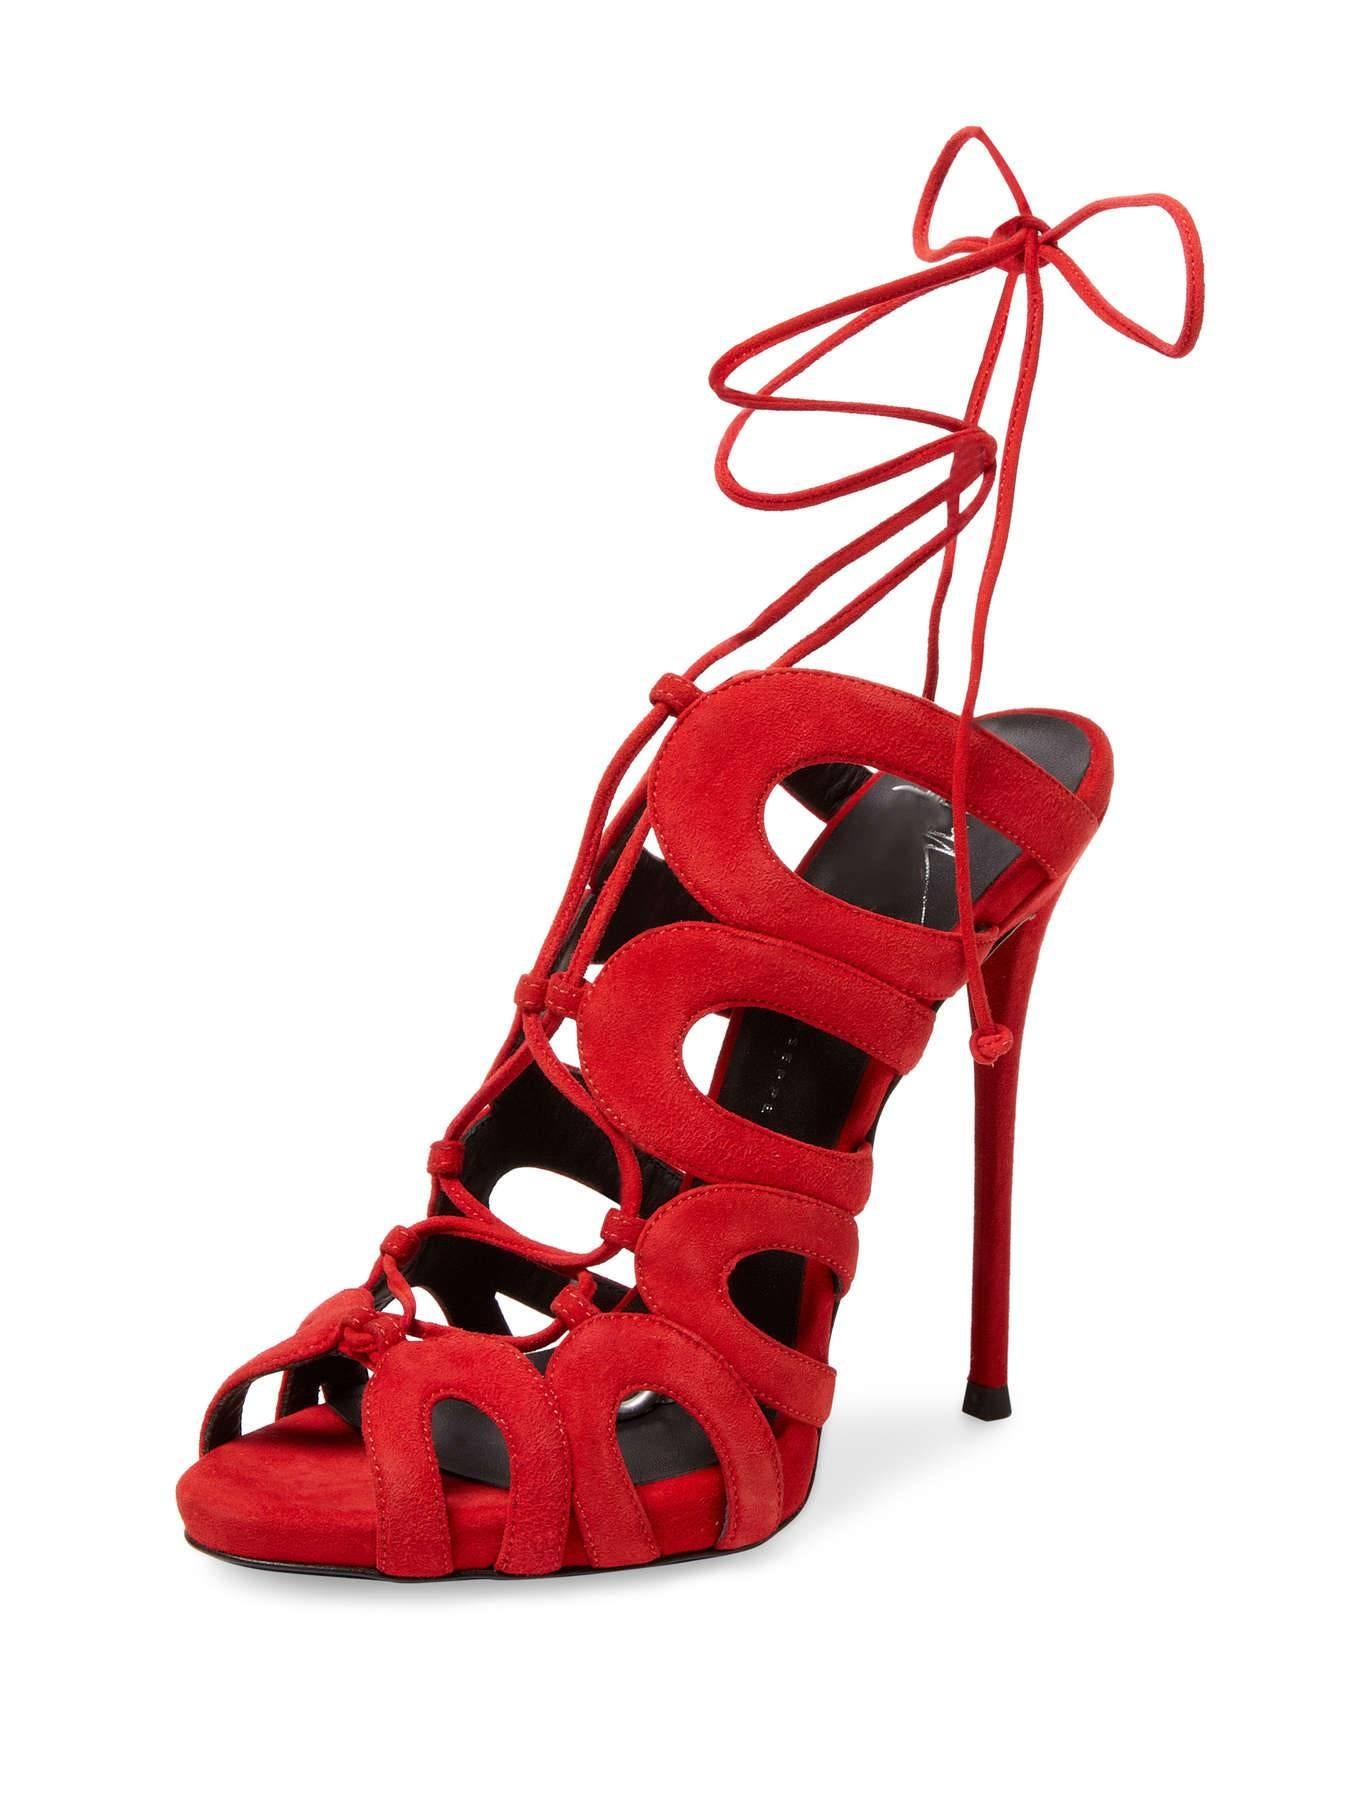 CURATOR'S NOTES  

Giuseppe Zanotti New Red Suede Cut Out Ankle Tie Evening Sandals Heels in Box   

Size IT 36.5 - Not your size? Contact us to help you find yours.
Suede 
Ankle tie closure 
Made in Italy 
Heel height 5" 
Includes original